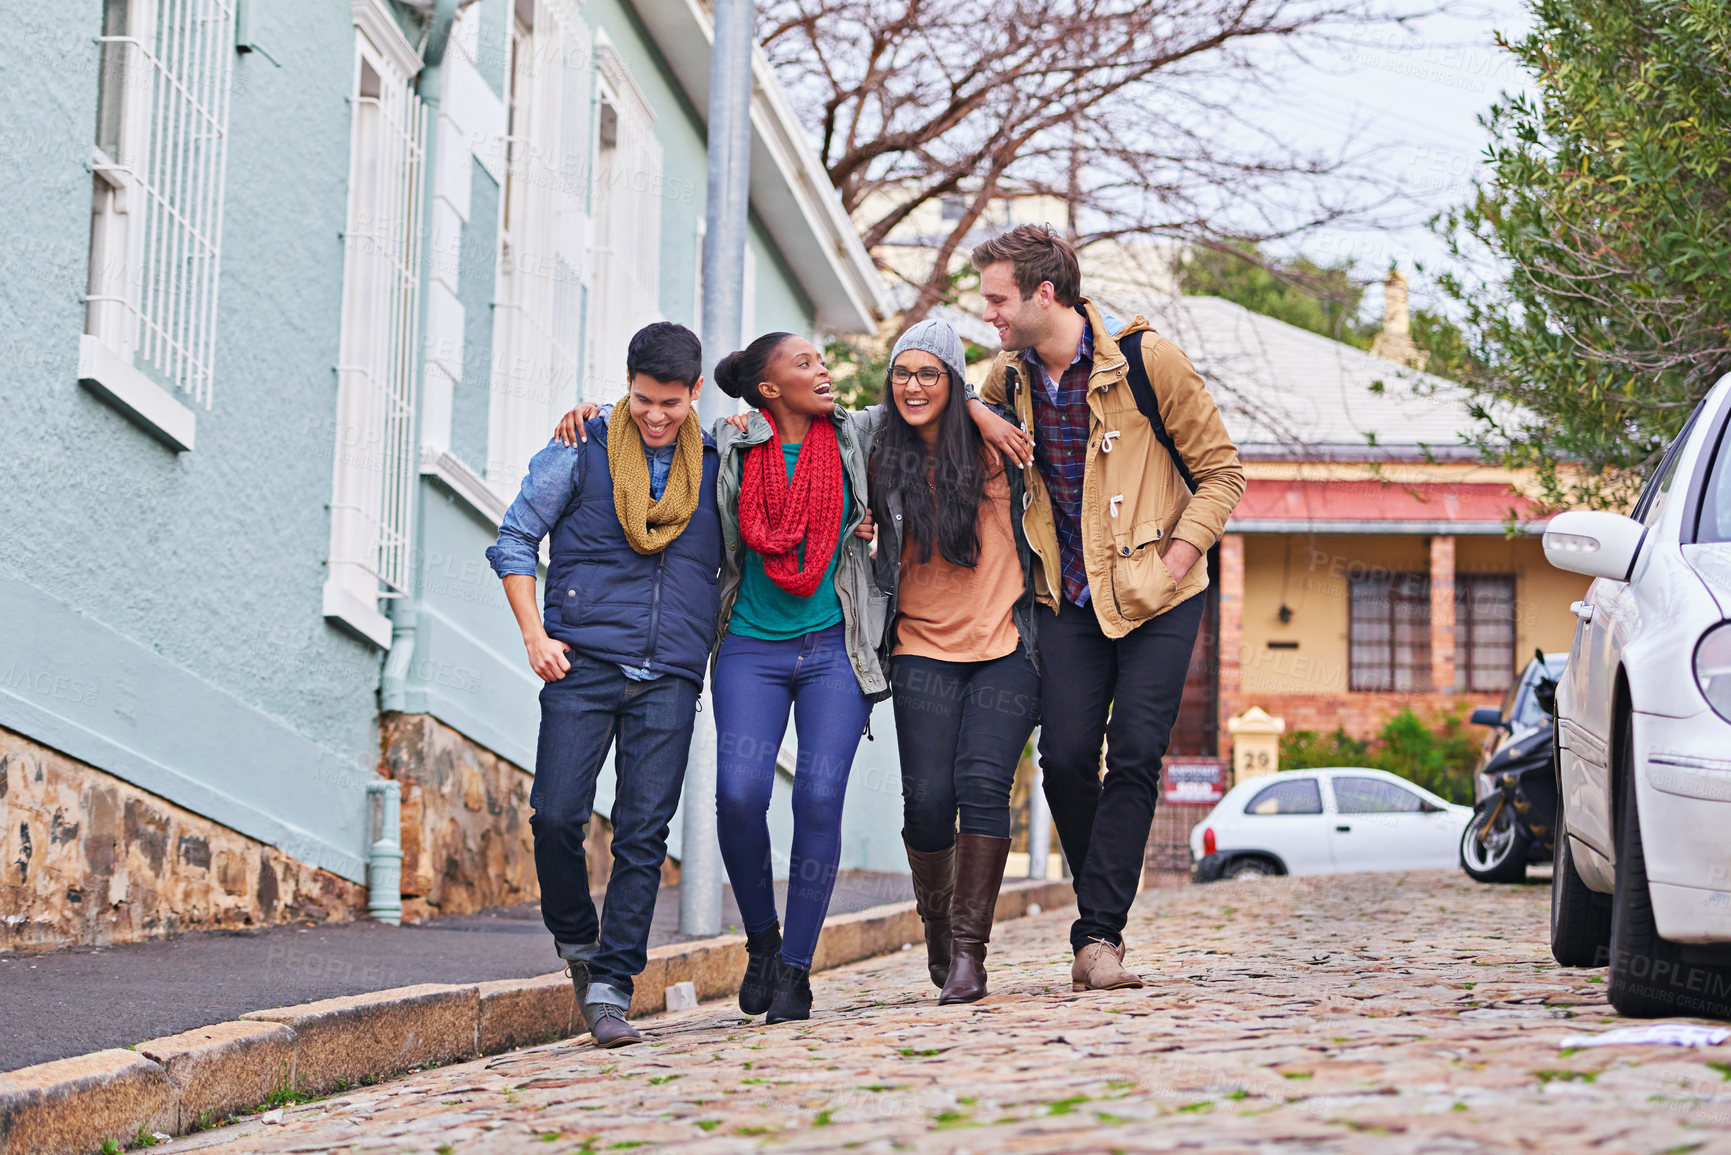 Buy stock photo Shot of a group of college students walking together on campus